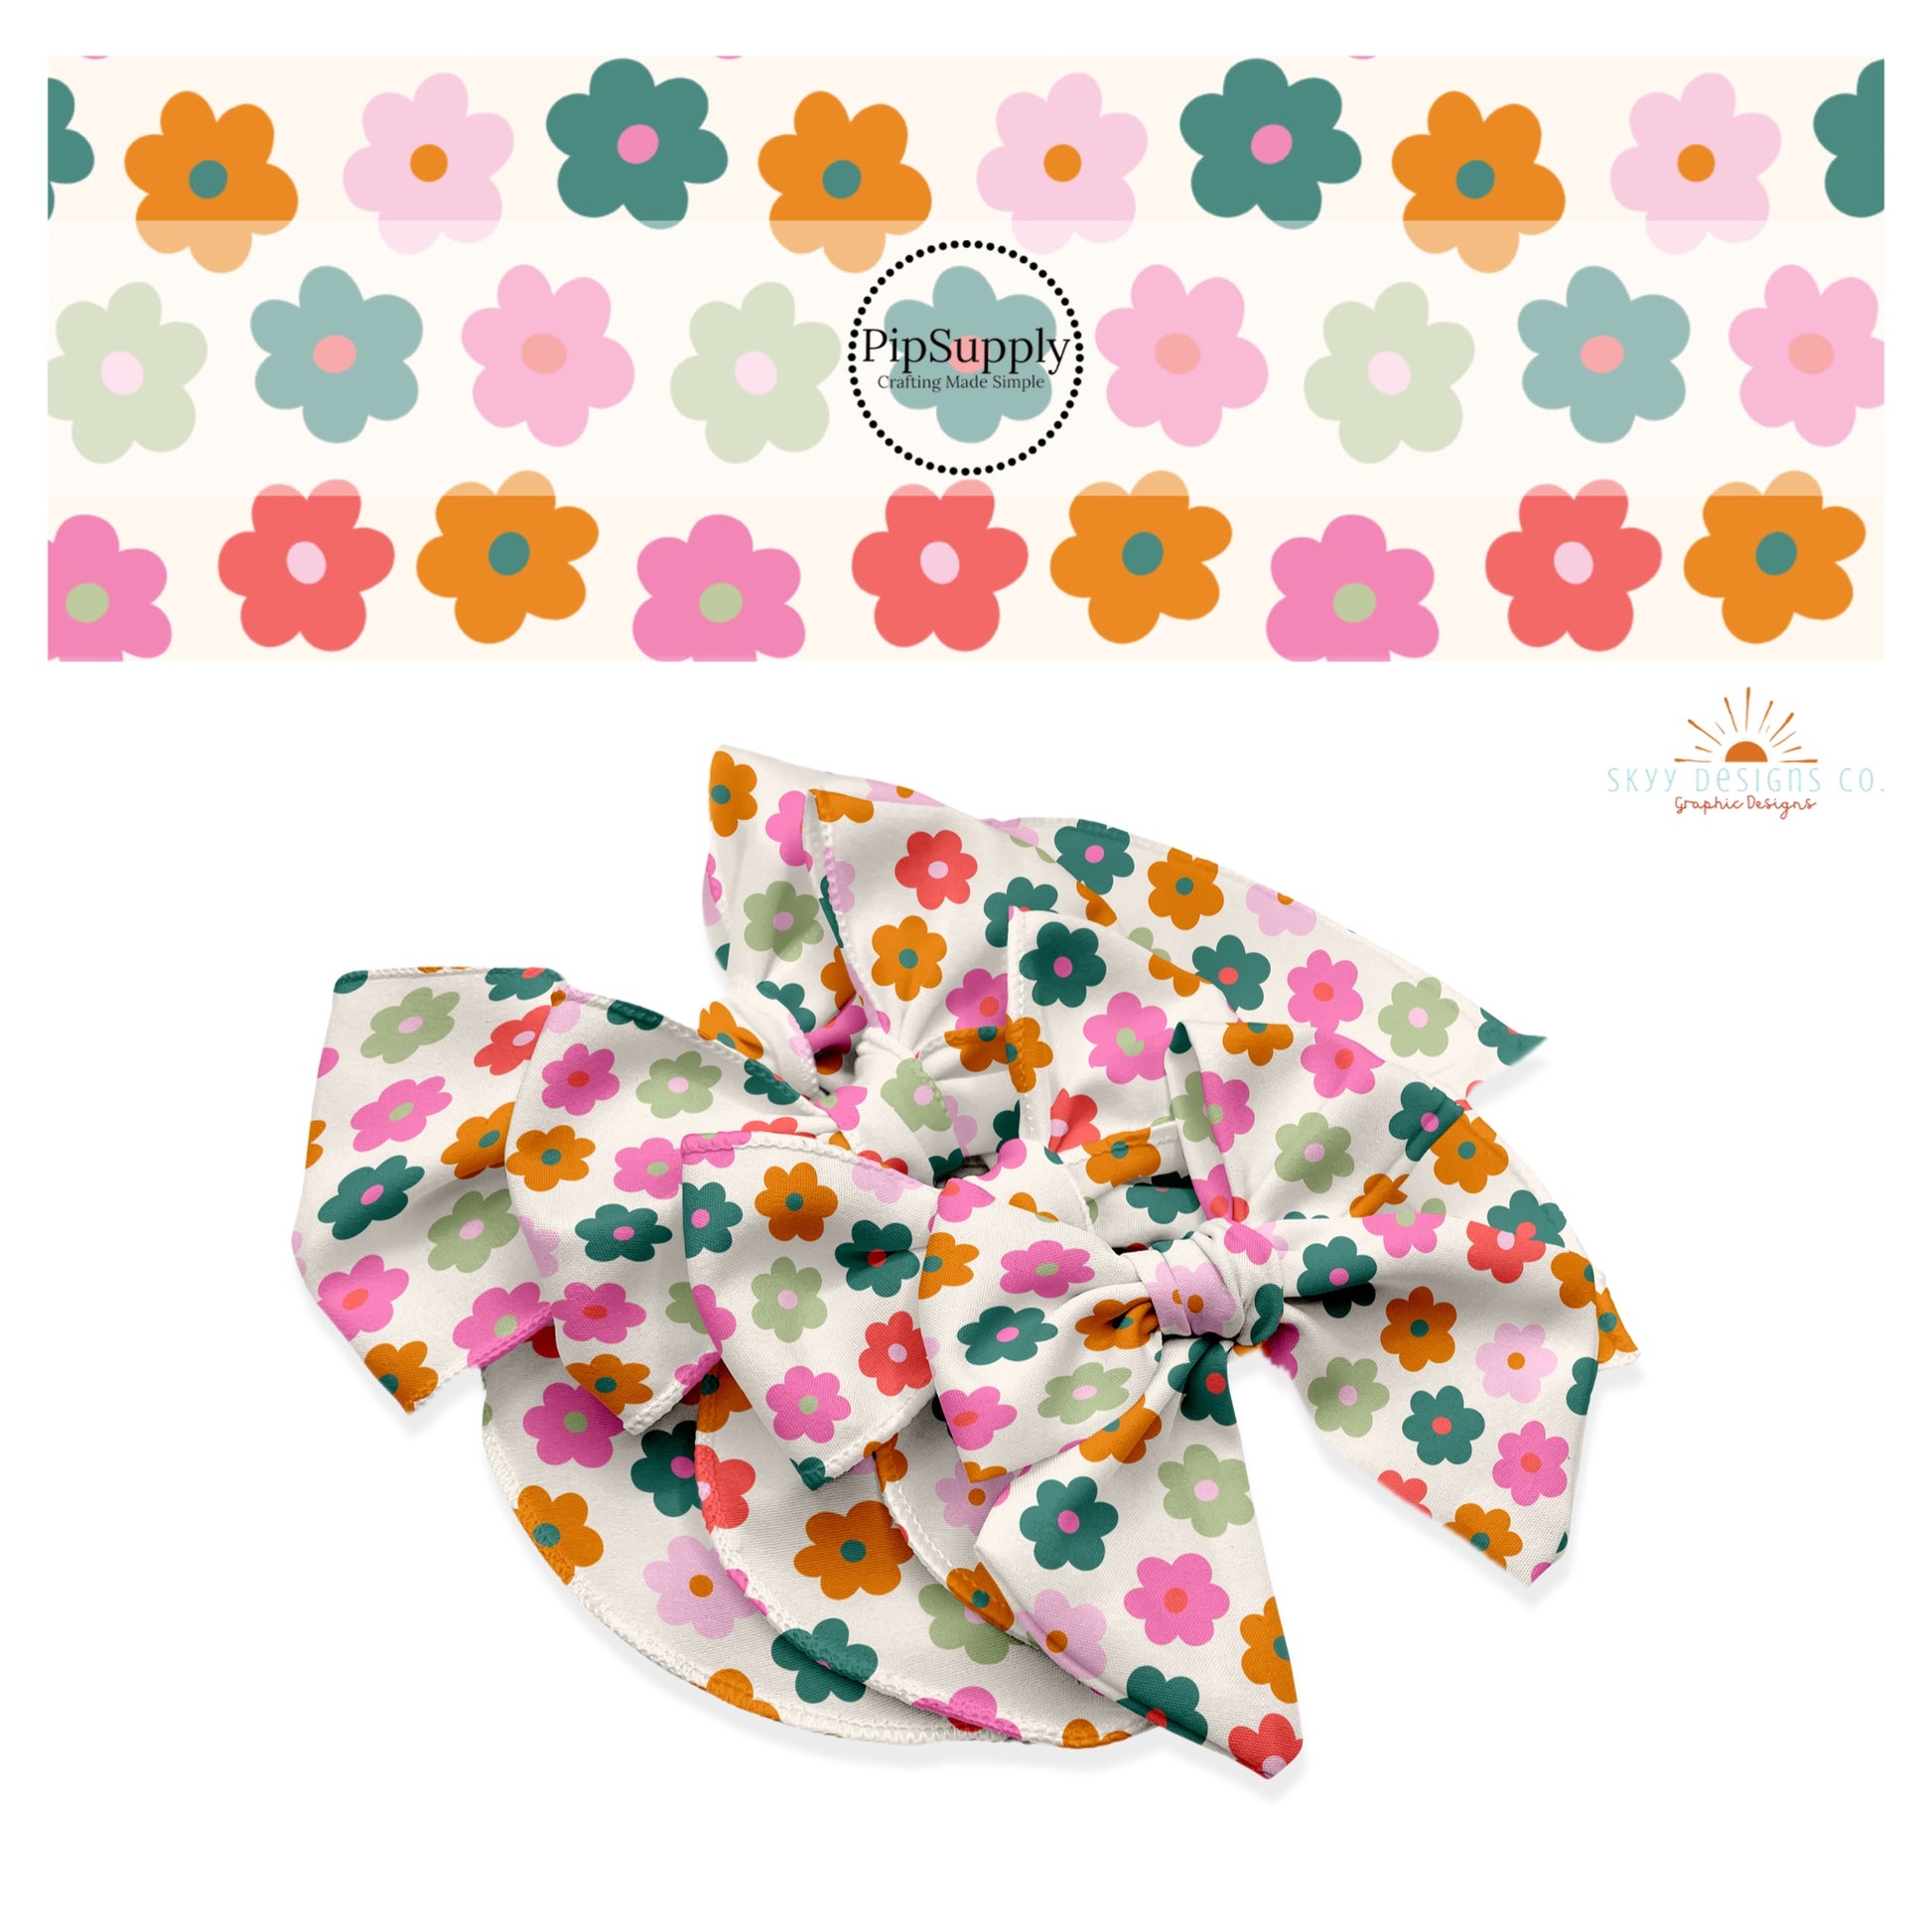 Orange with green center, pink with orange and green centers, green with pink centers, and coral with pink center daisies on cream hair bow strips